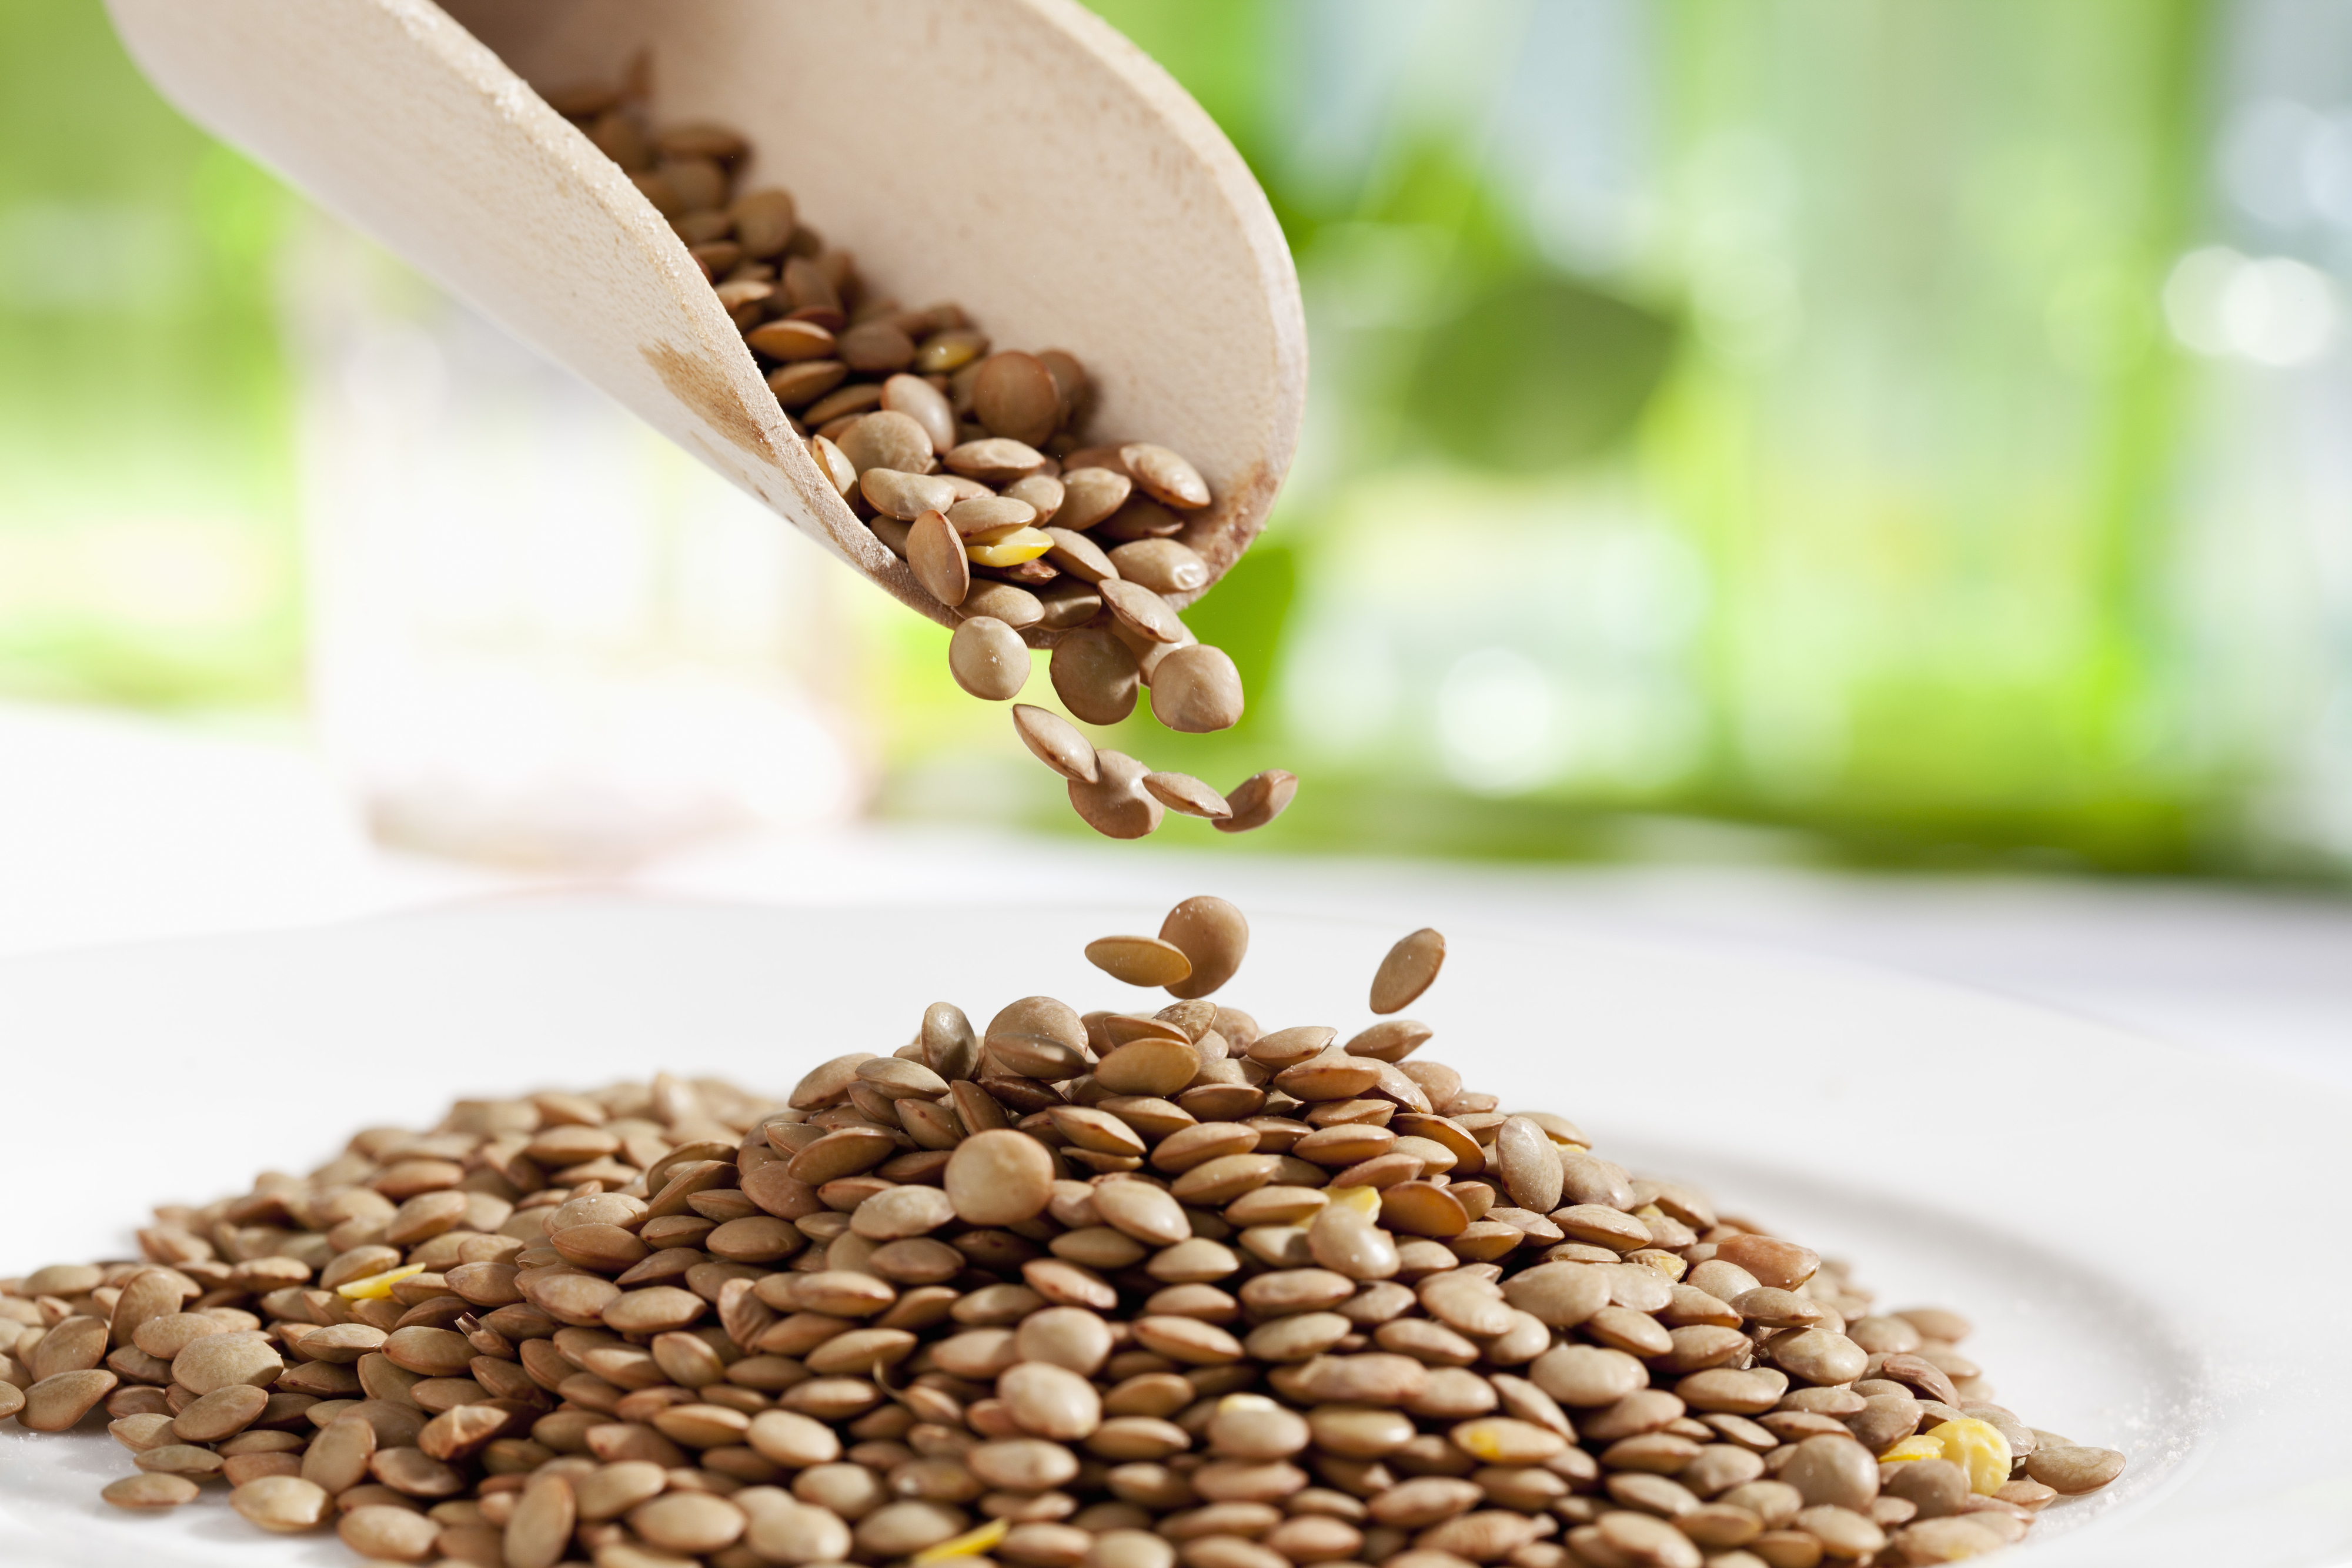 A scoop pouring lentils onto a surface, suggesting a focus on healthy eating or ingredients